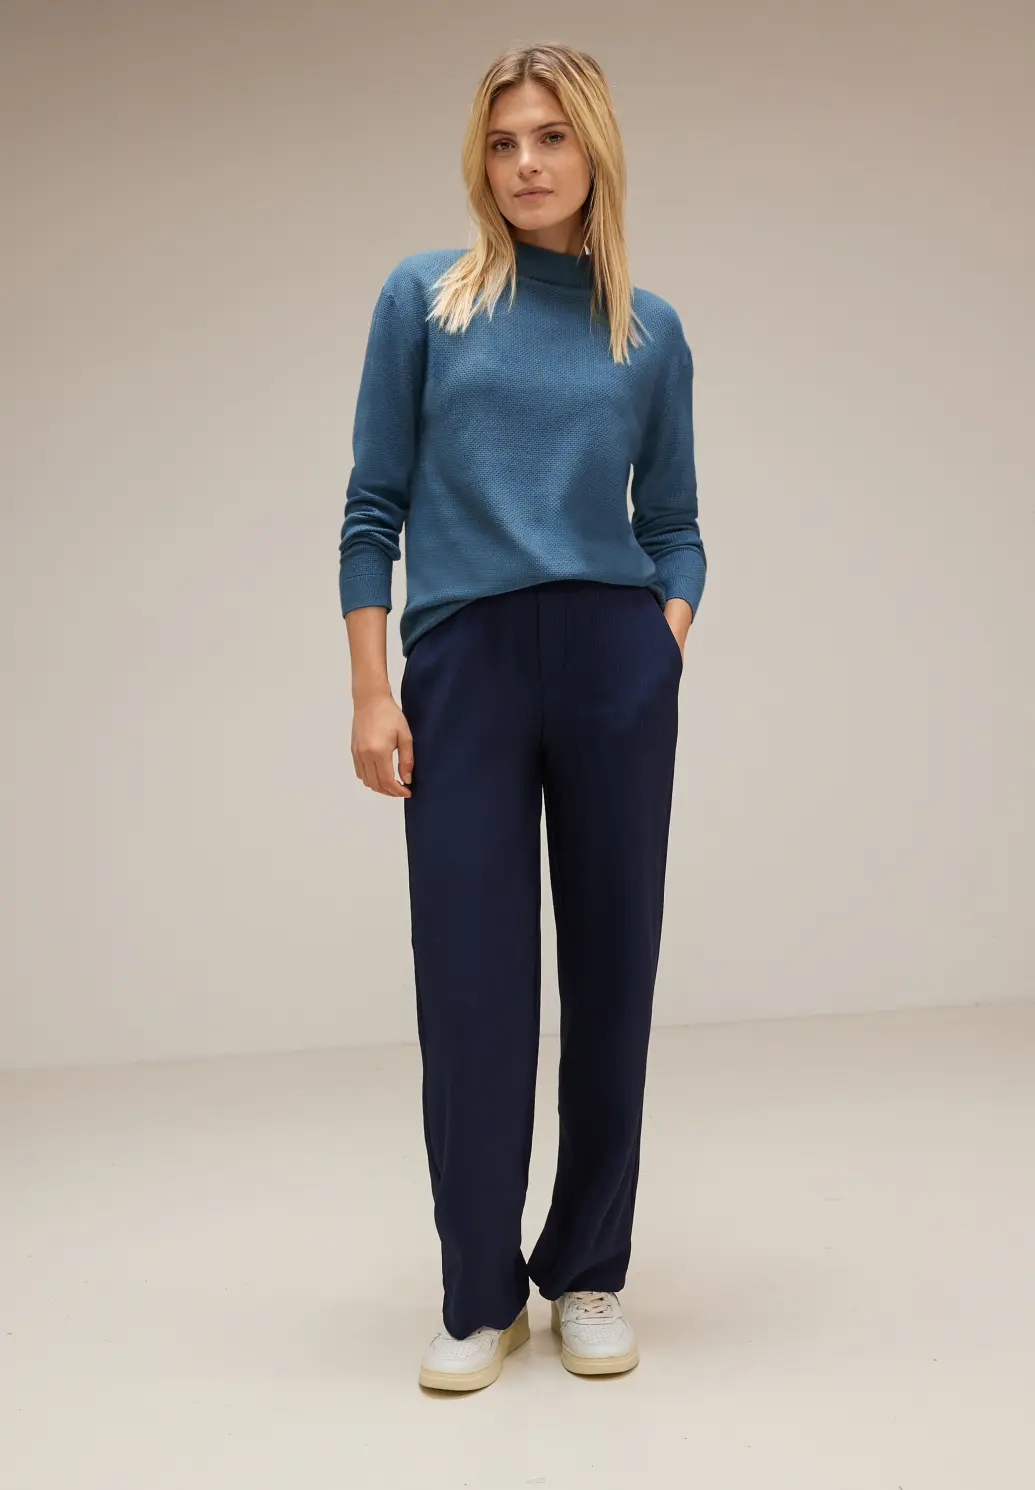 - | with Street Cotton Satin Structure Knit Jumper Blues - Melange Blue One